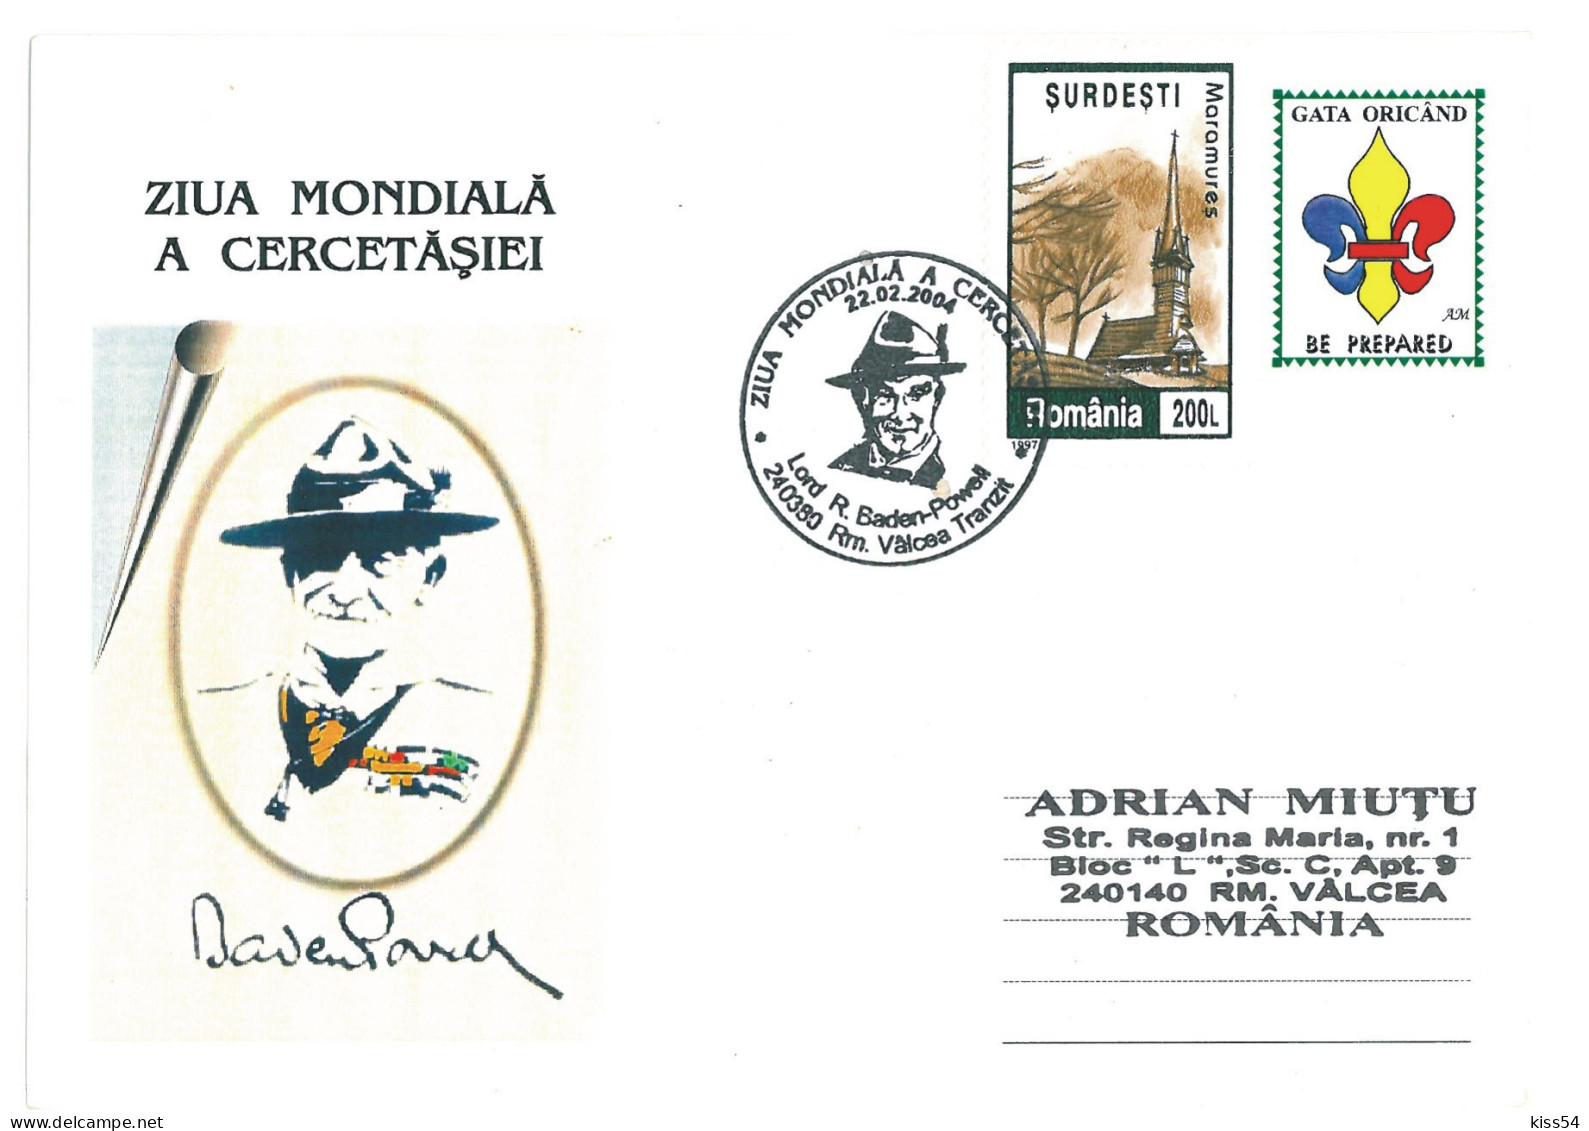 SC 06 - 3148 SCOUT, Thinking Day, Lord Robert BADEN POWELL, Romania - Cover - Used - 2004 - Covers & Documents